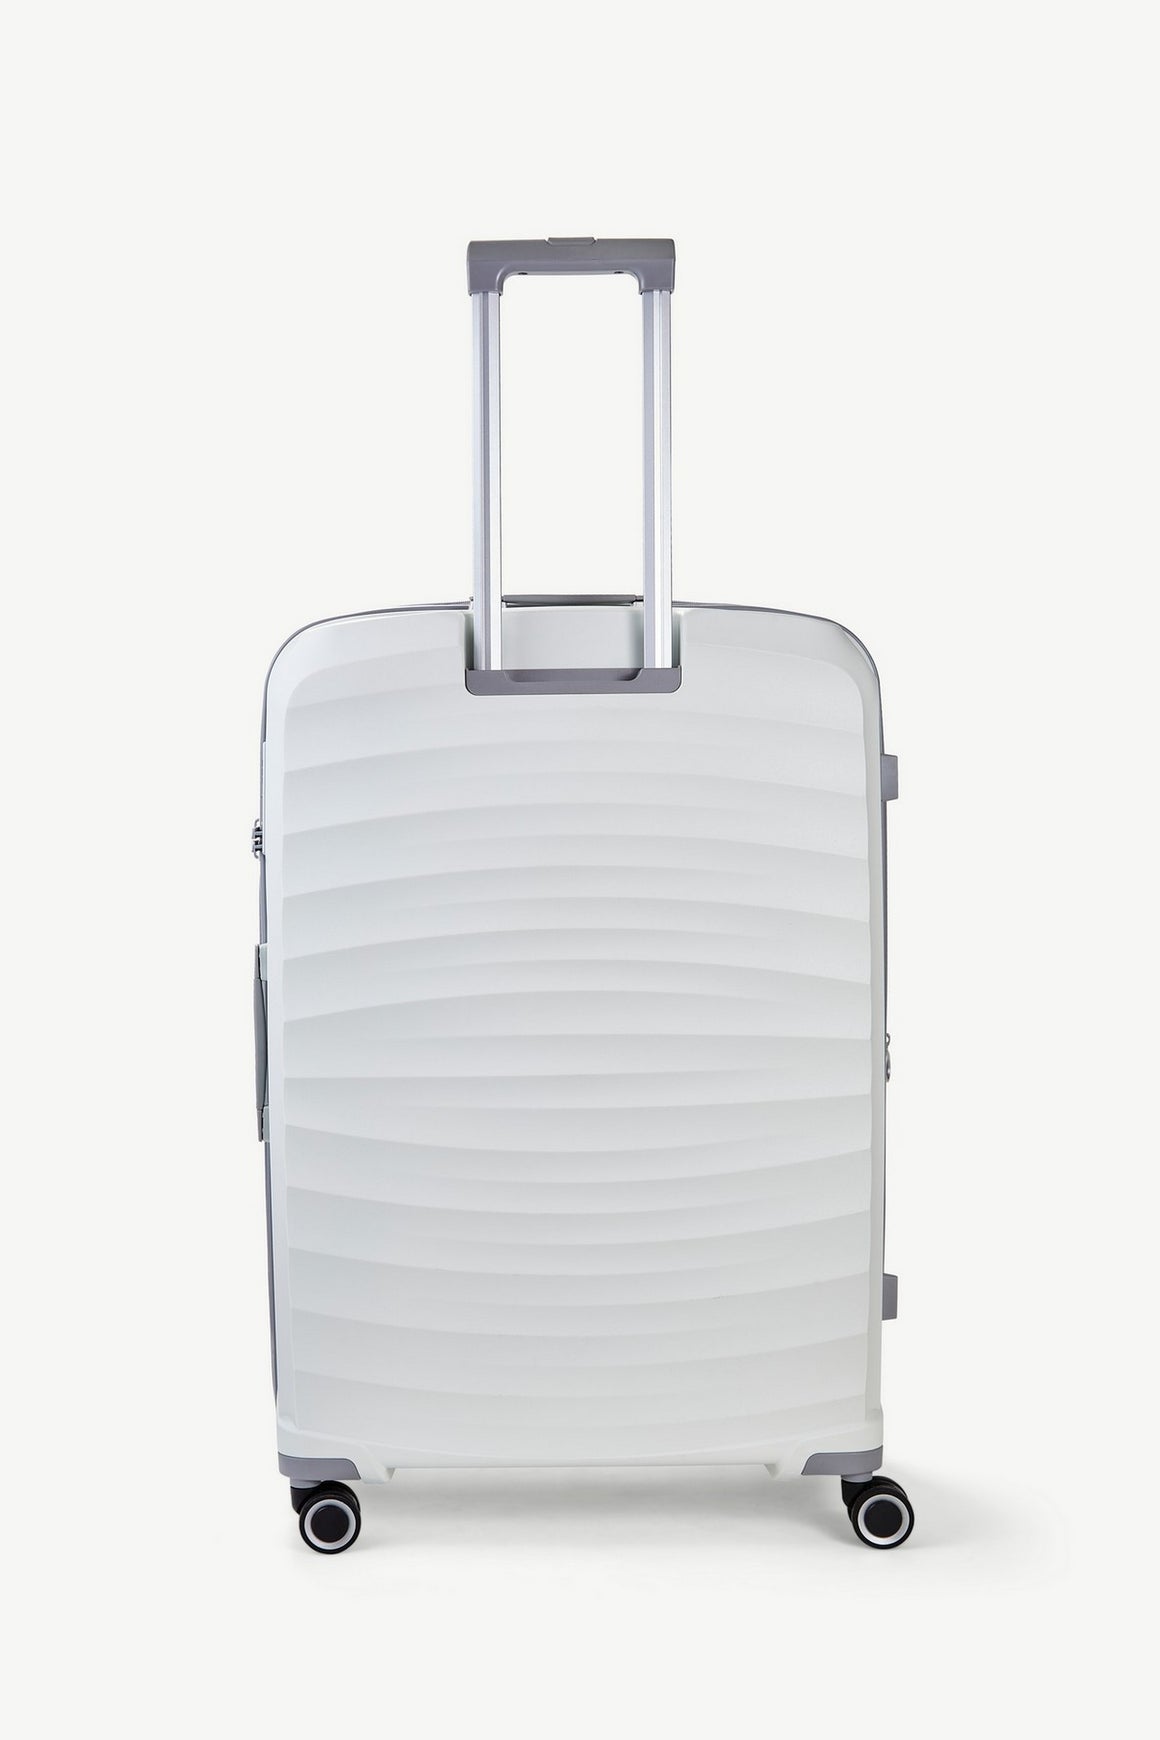 Sunwave Set of 3 Suitcases